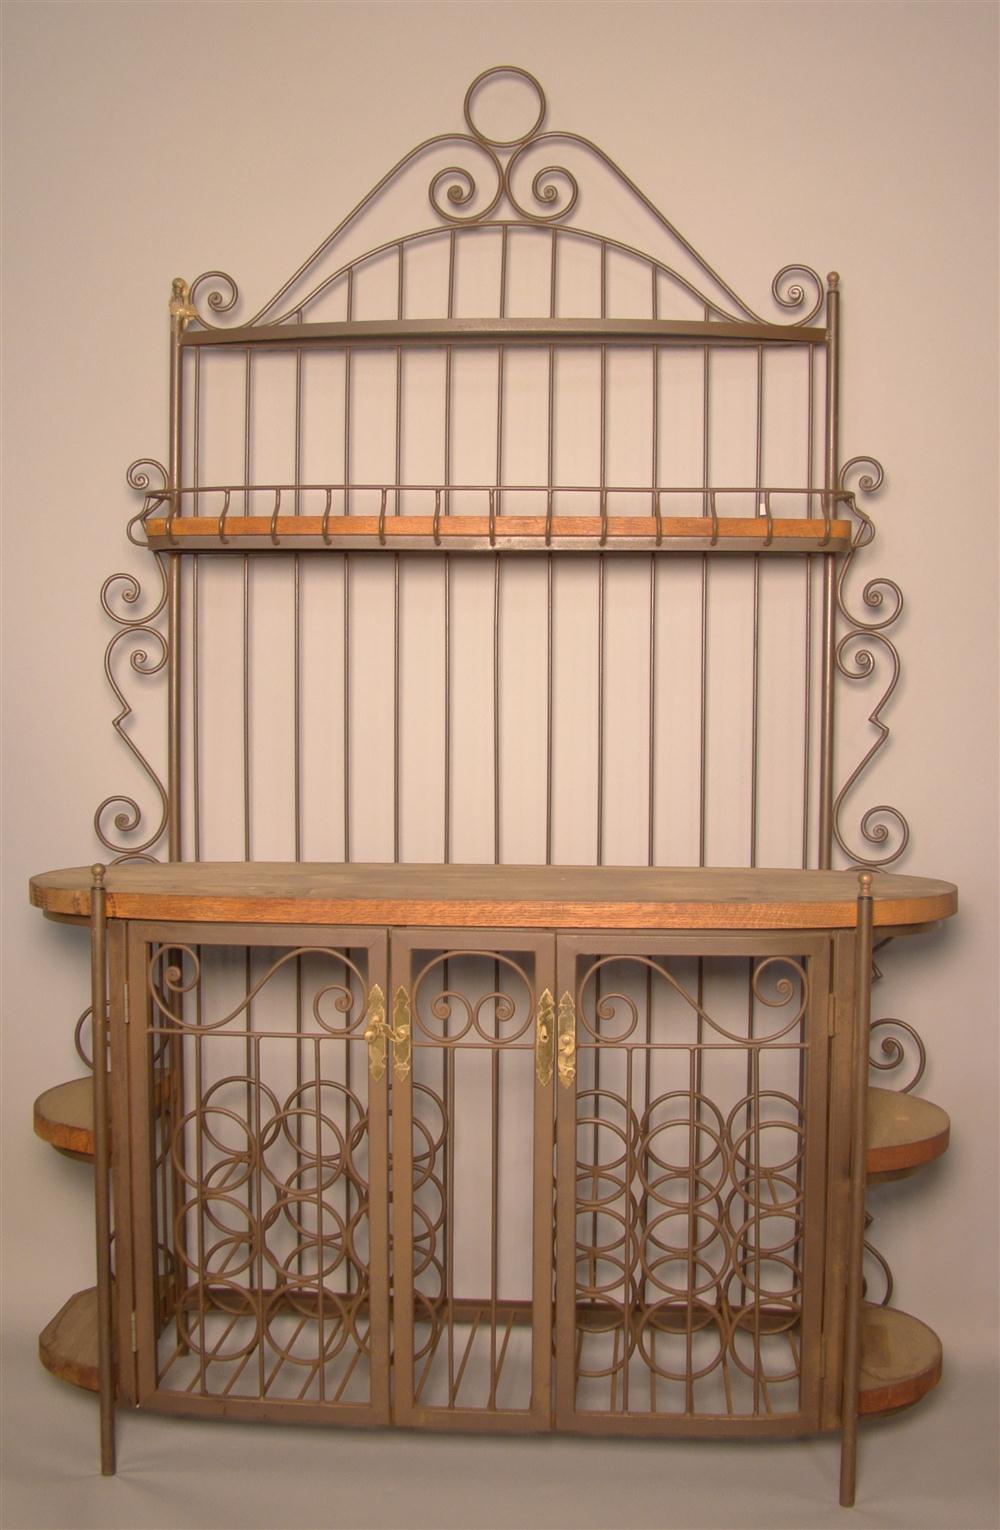 BAKER'S OAK AND METAL RACK With